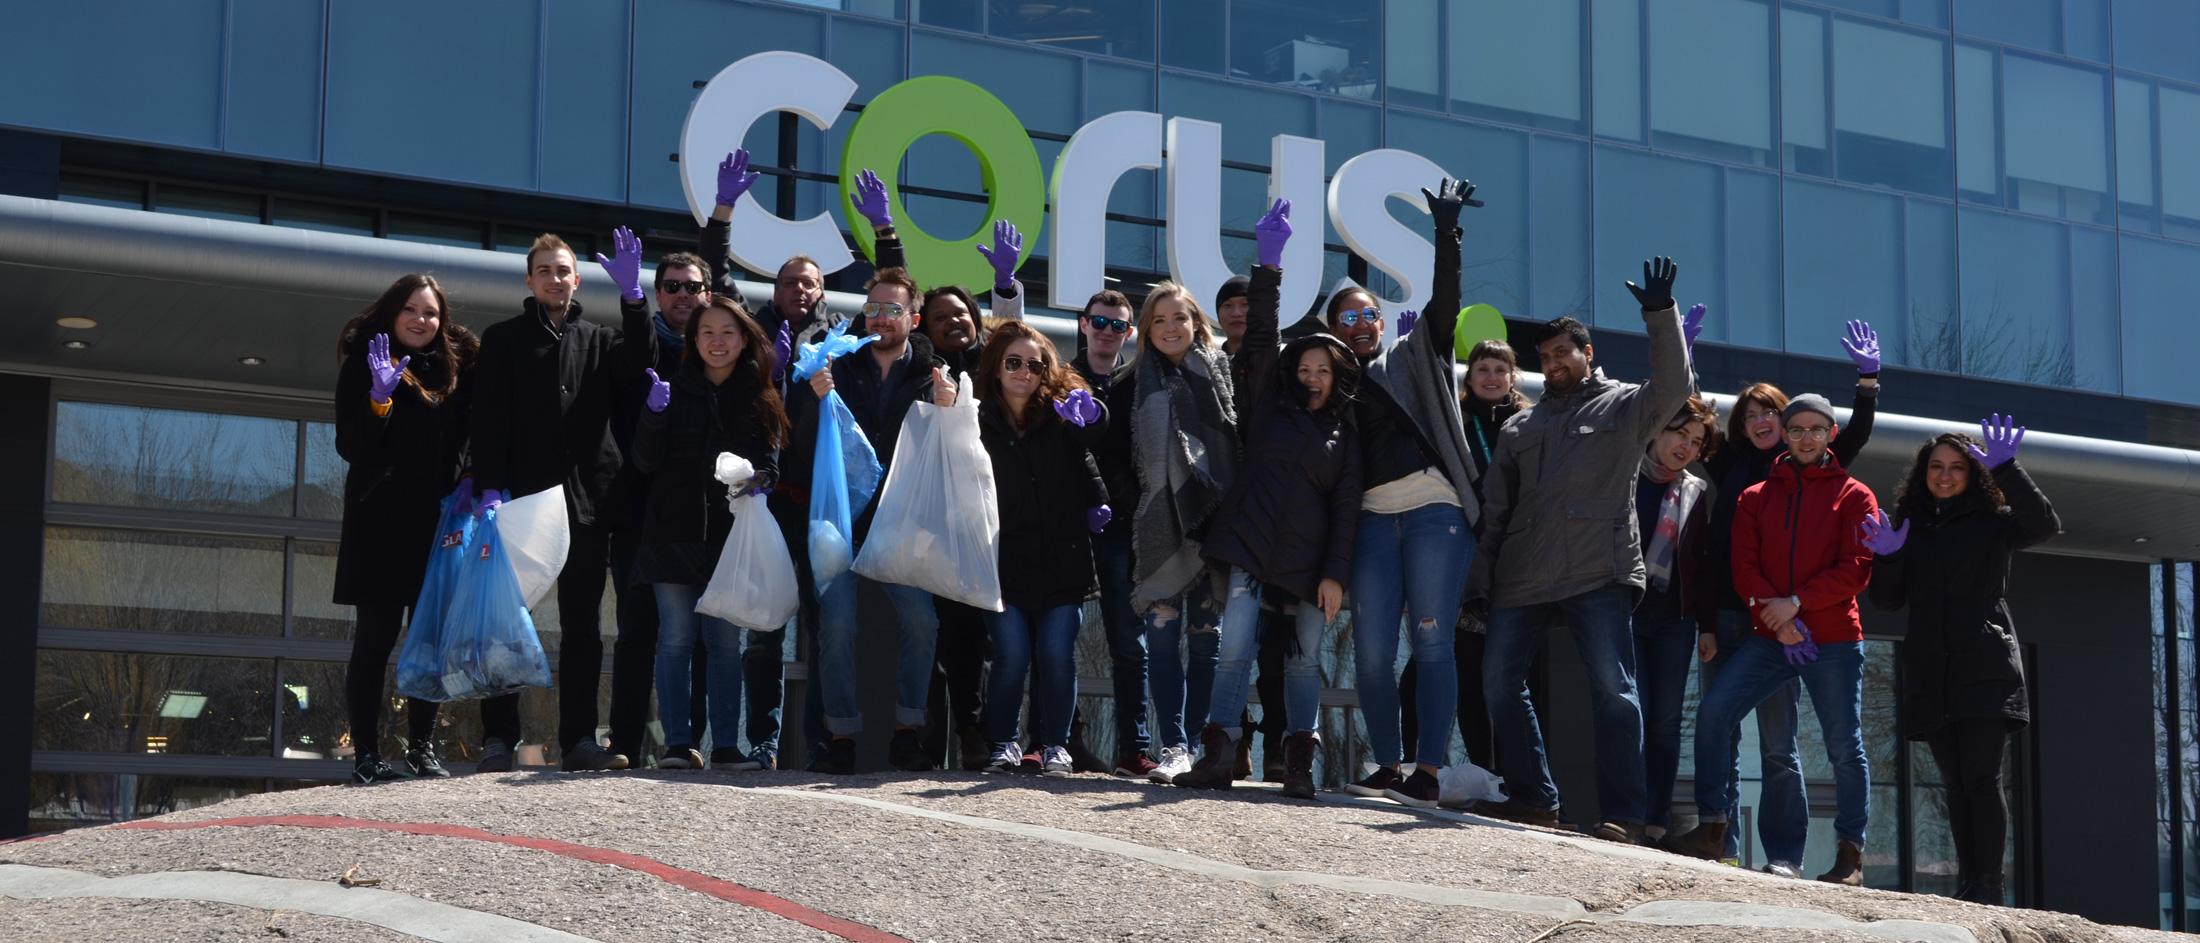 people standing in front of corus building